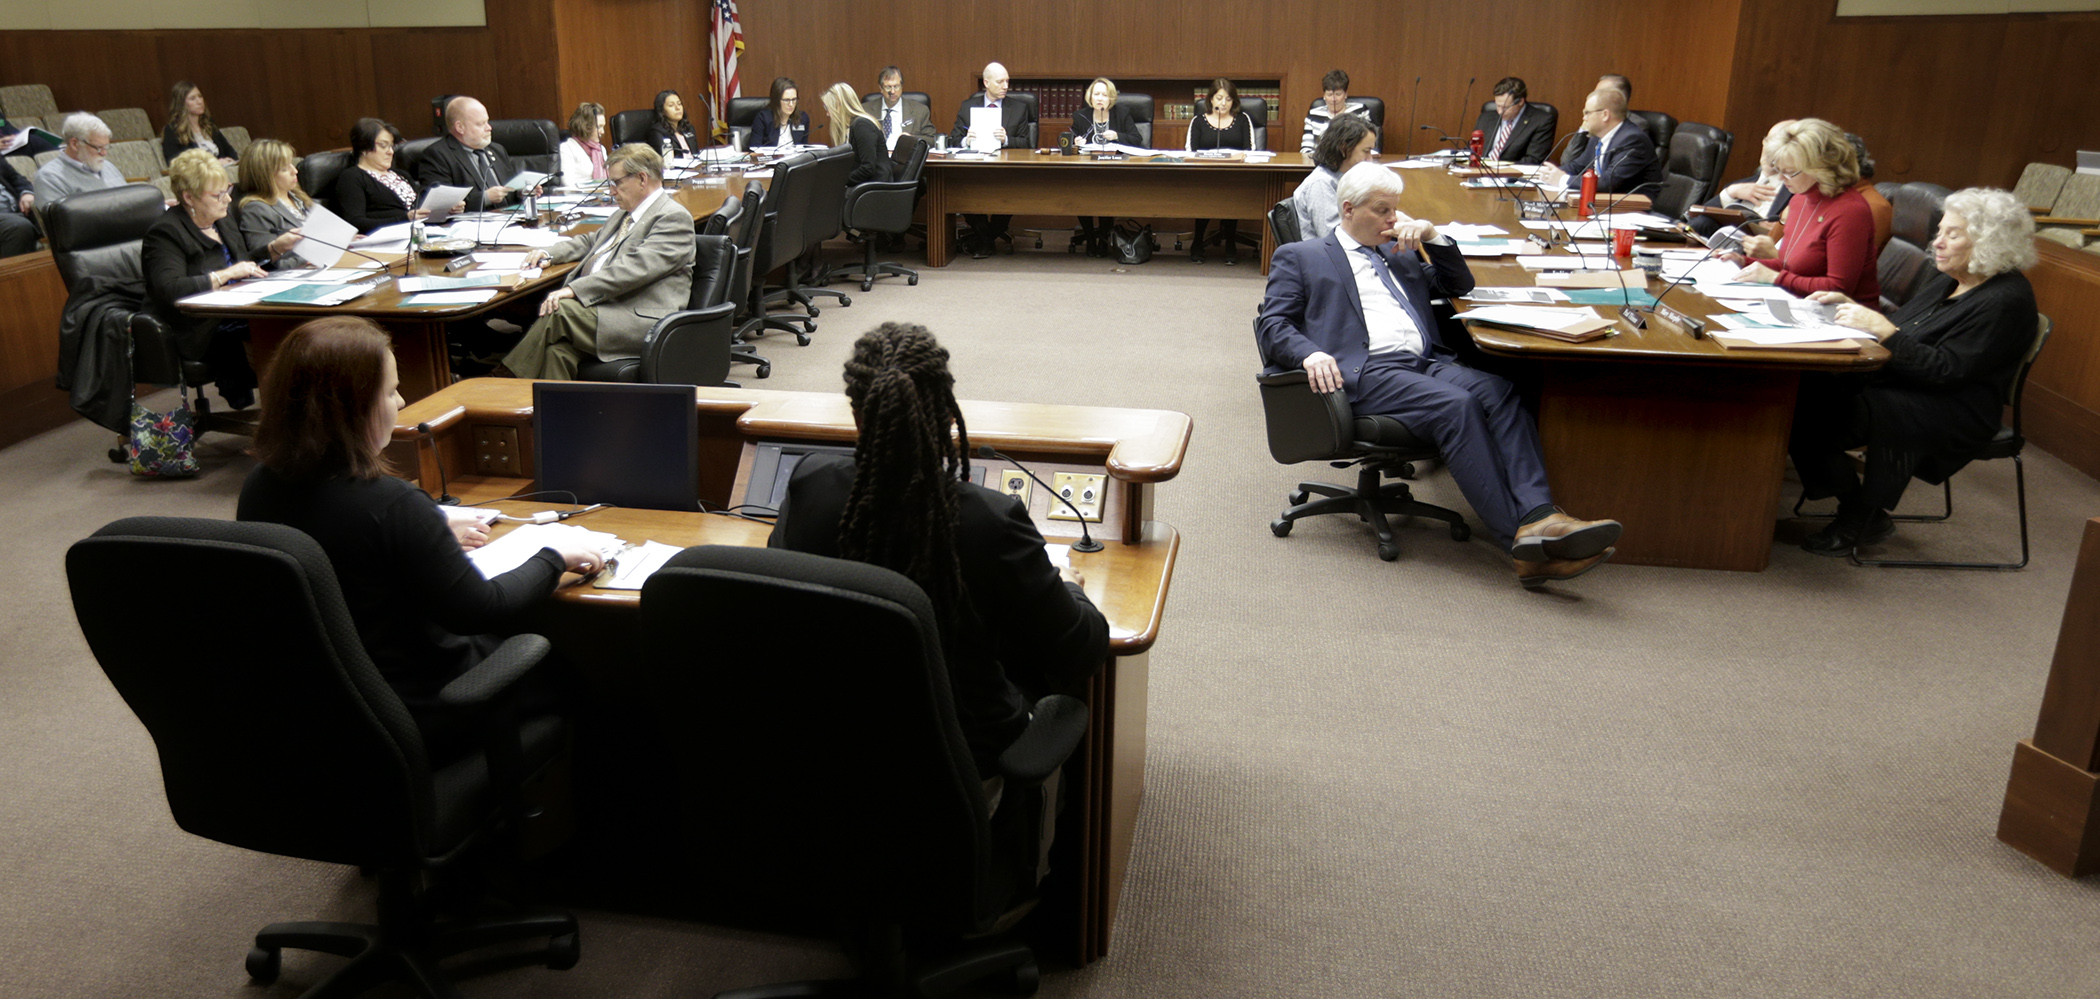 Members of the House Education Finance Committee received updates from a number education organizations during its Feb. 22 meeting. Photo by Paul Battaglia